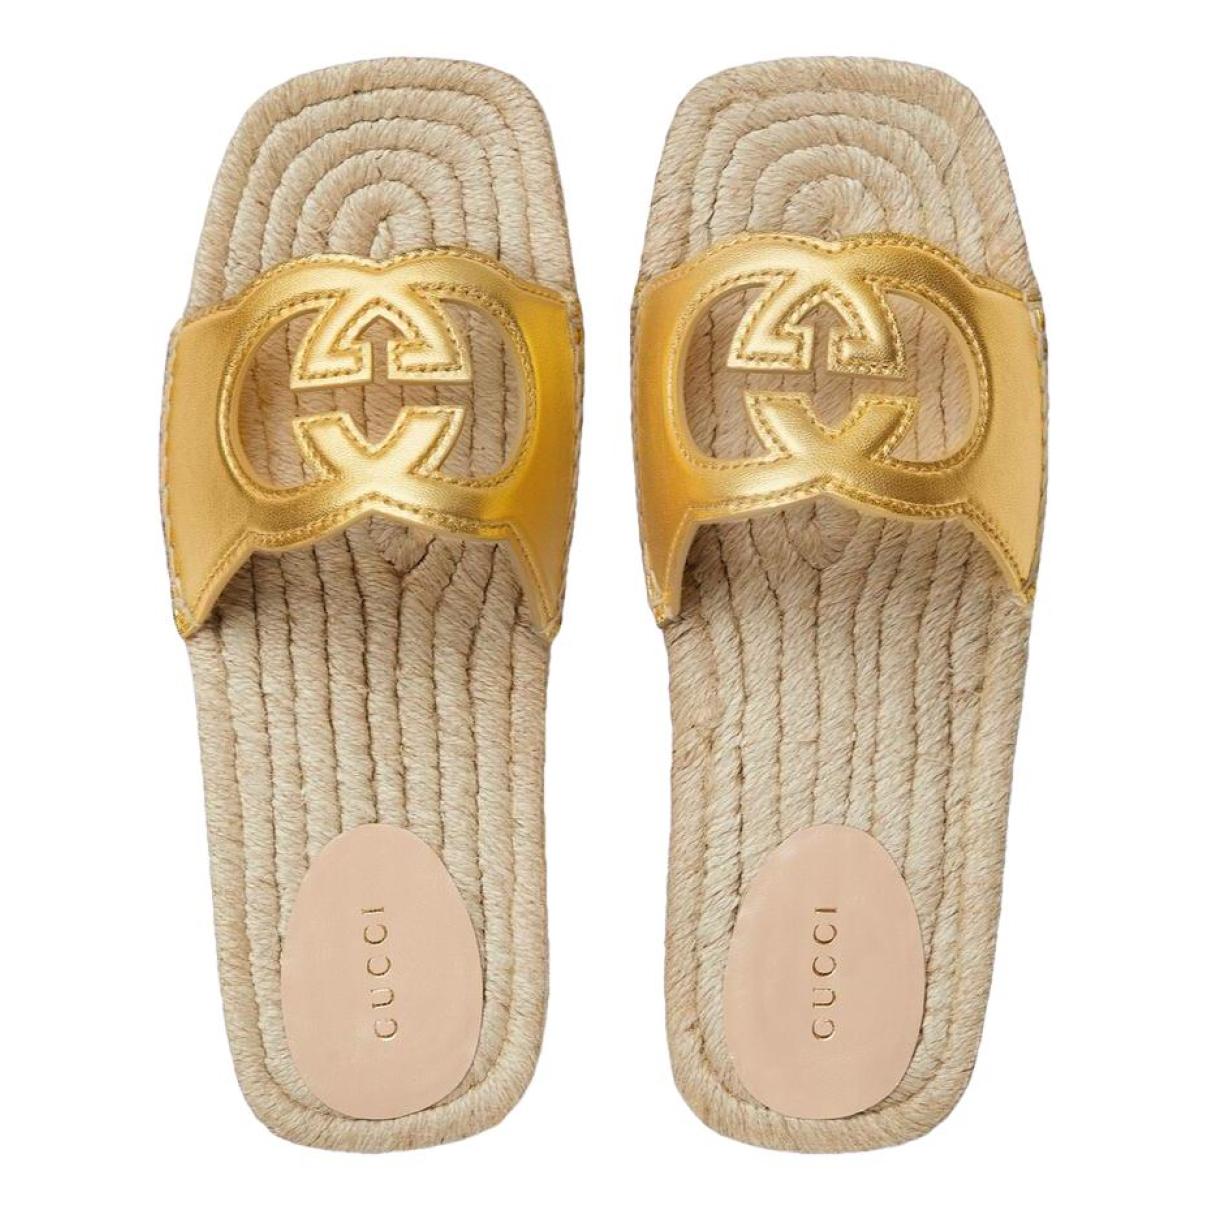 Double G leather sandal